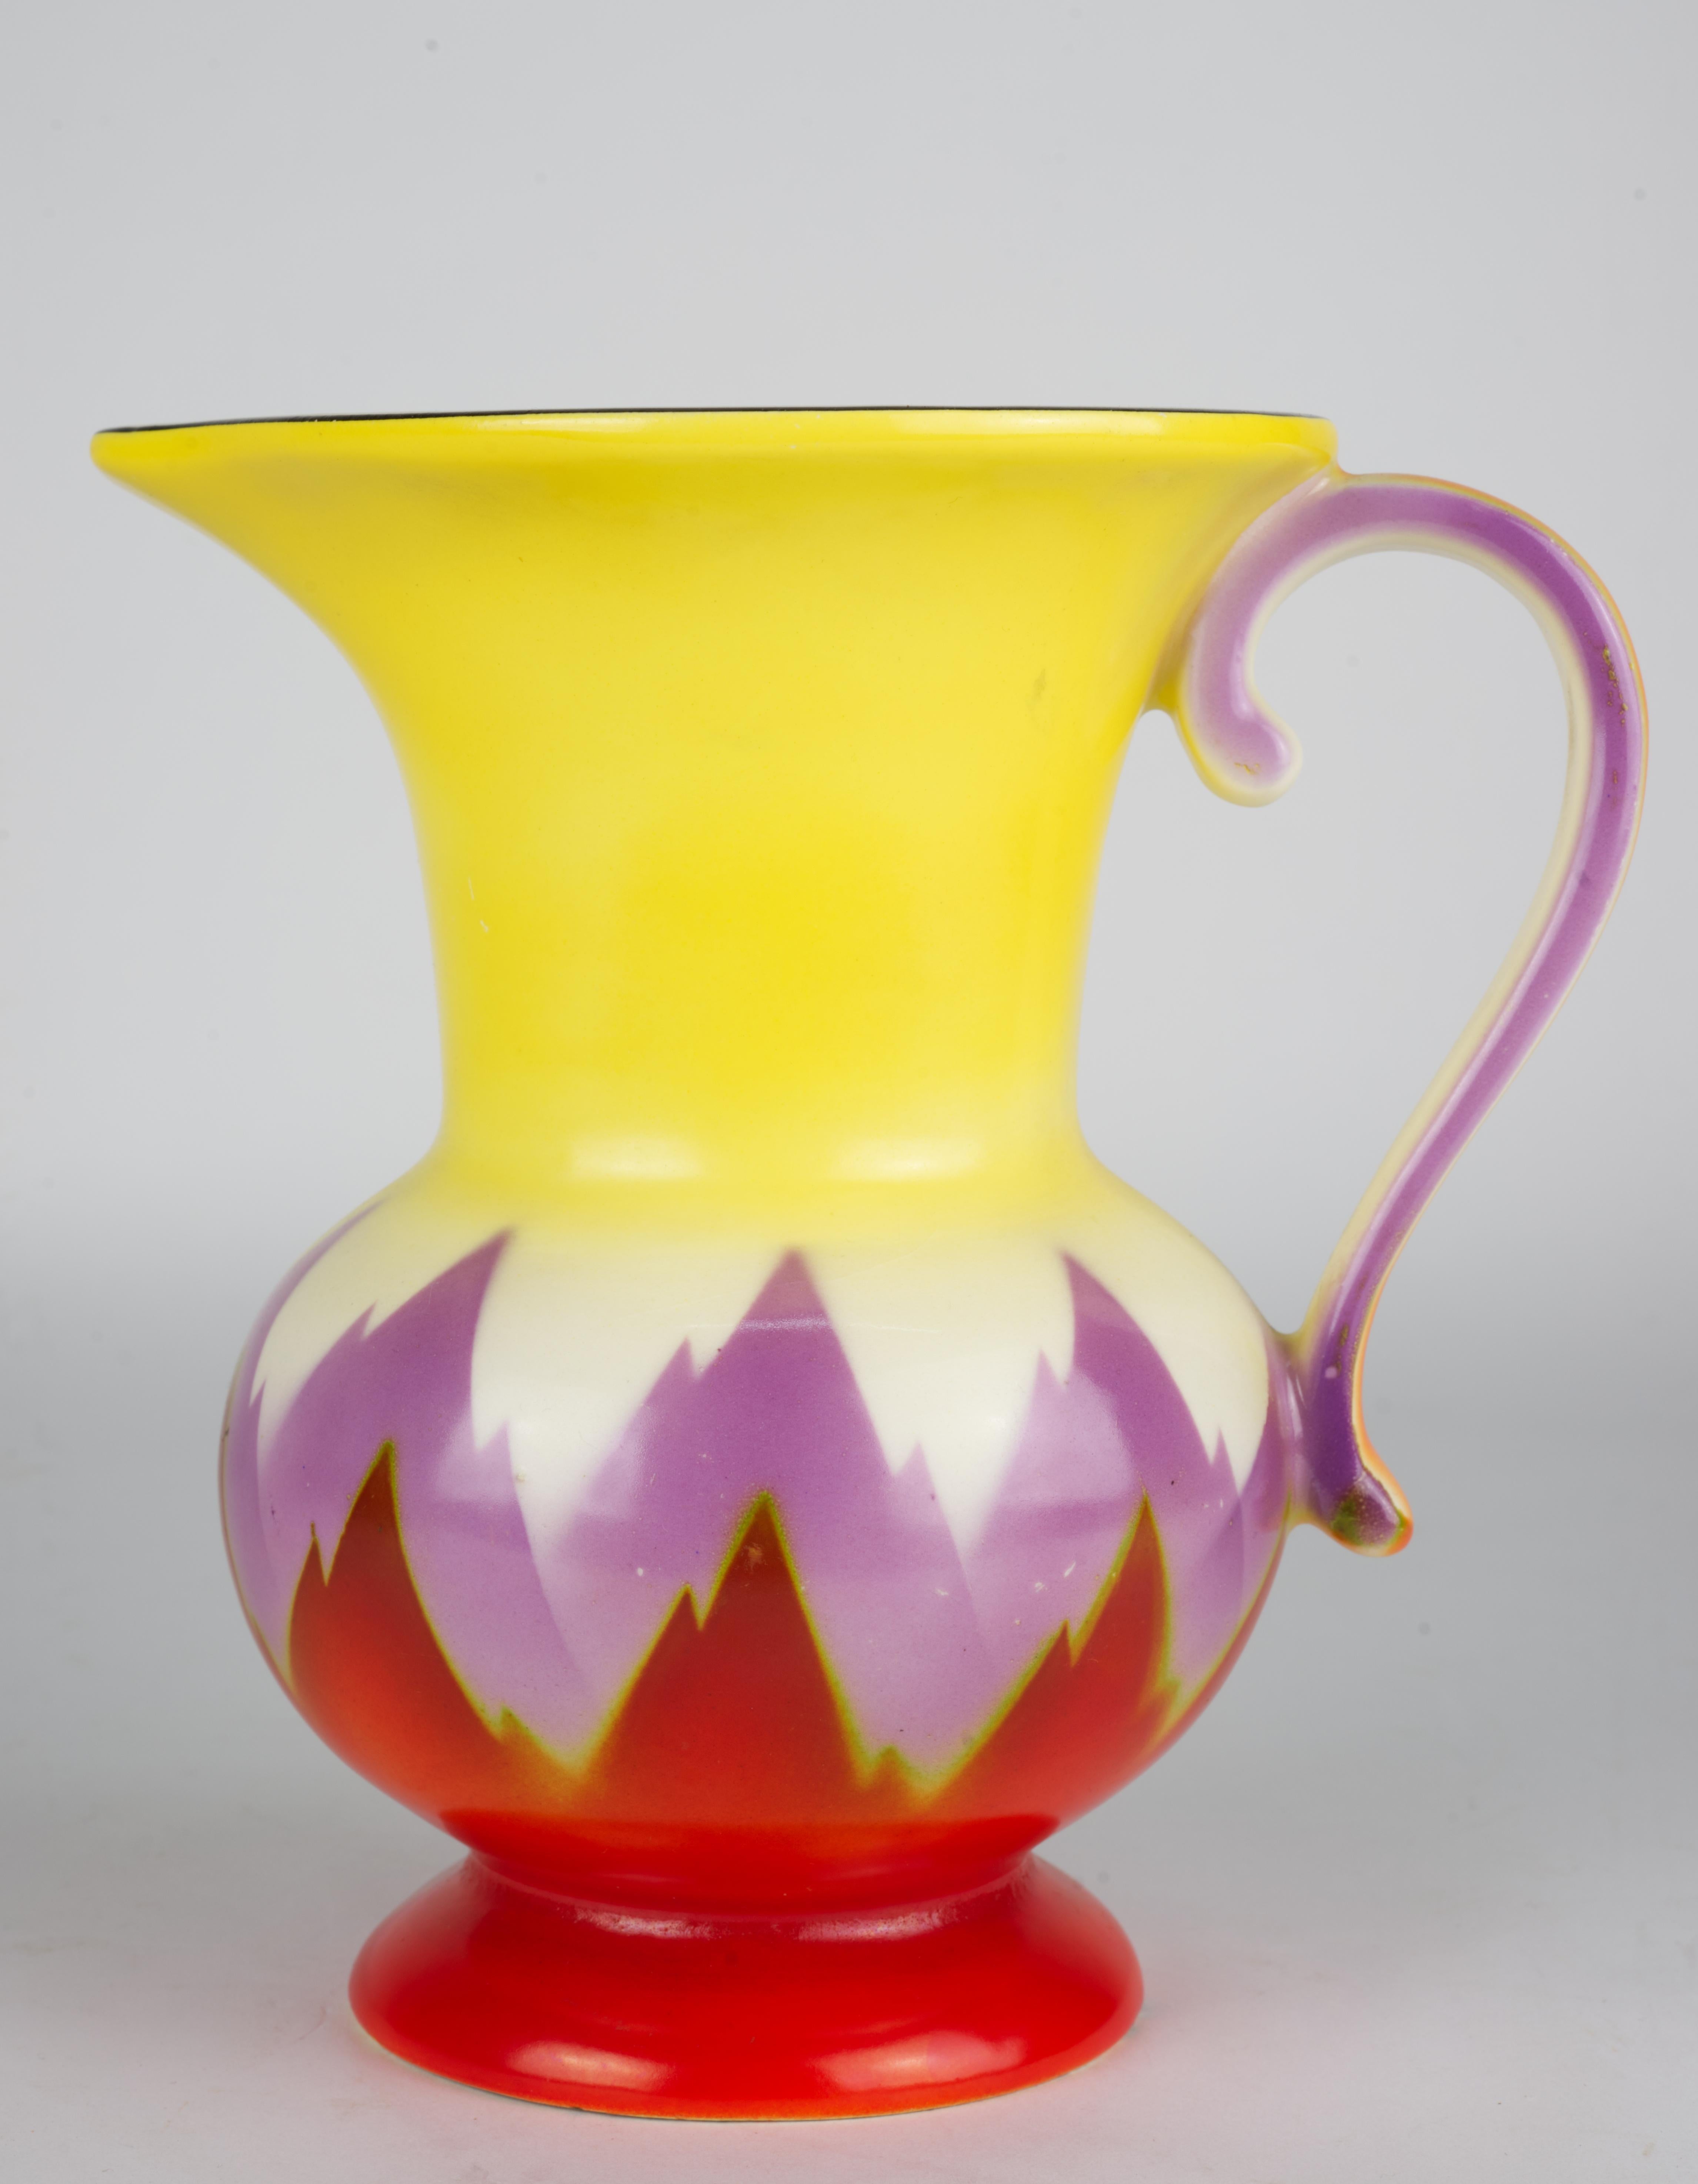  Art Deco pitcher with abstract flame design in hues of red, purple and yellow was made by Ditmar-Urbach Porcelain Factory. Urbach pottery was founded in 1882 in Turn-Teplitz, Bohemia (now Trnovany, Czech Republic) in 1882. It merged with Rudolf